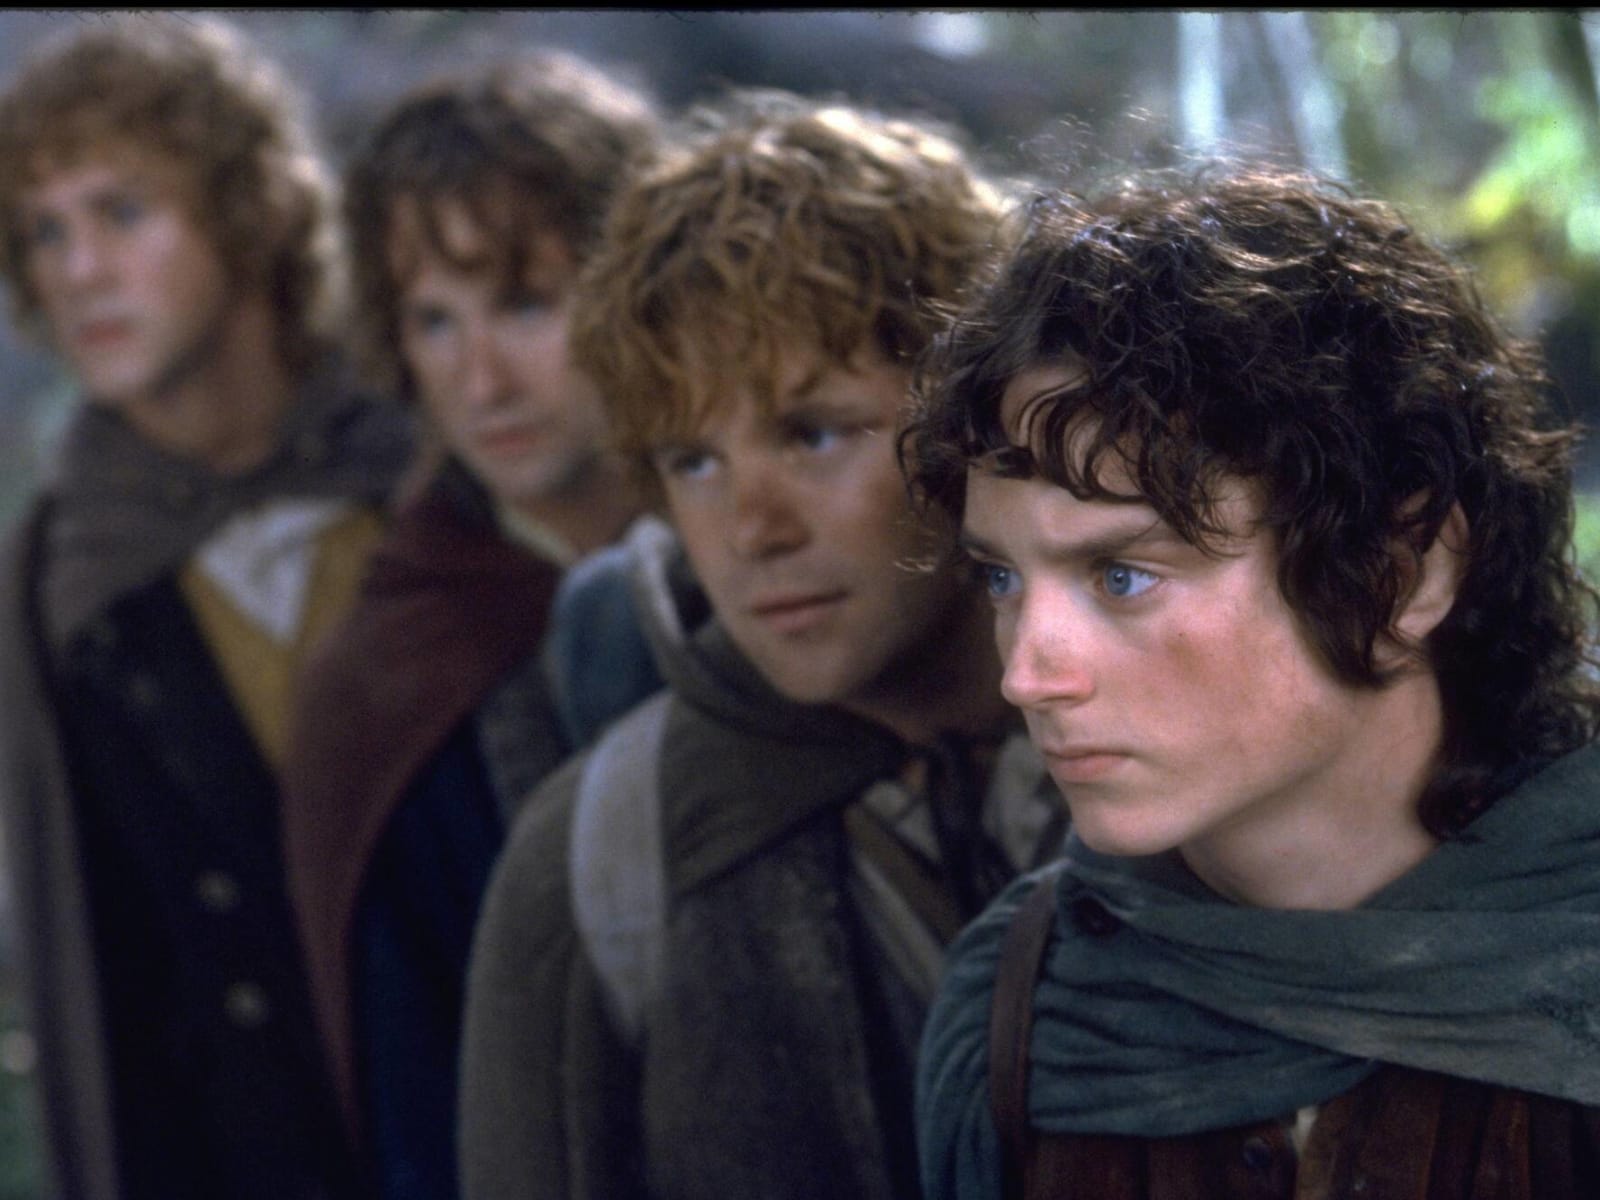 max sees movies: #50: The Lord of the Rings: The Fellowship of the Ring